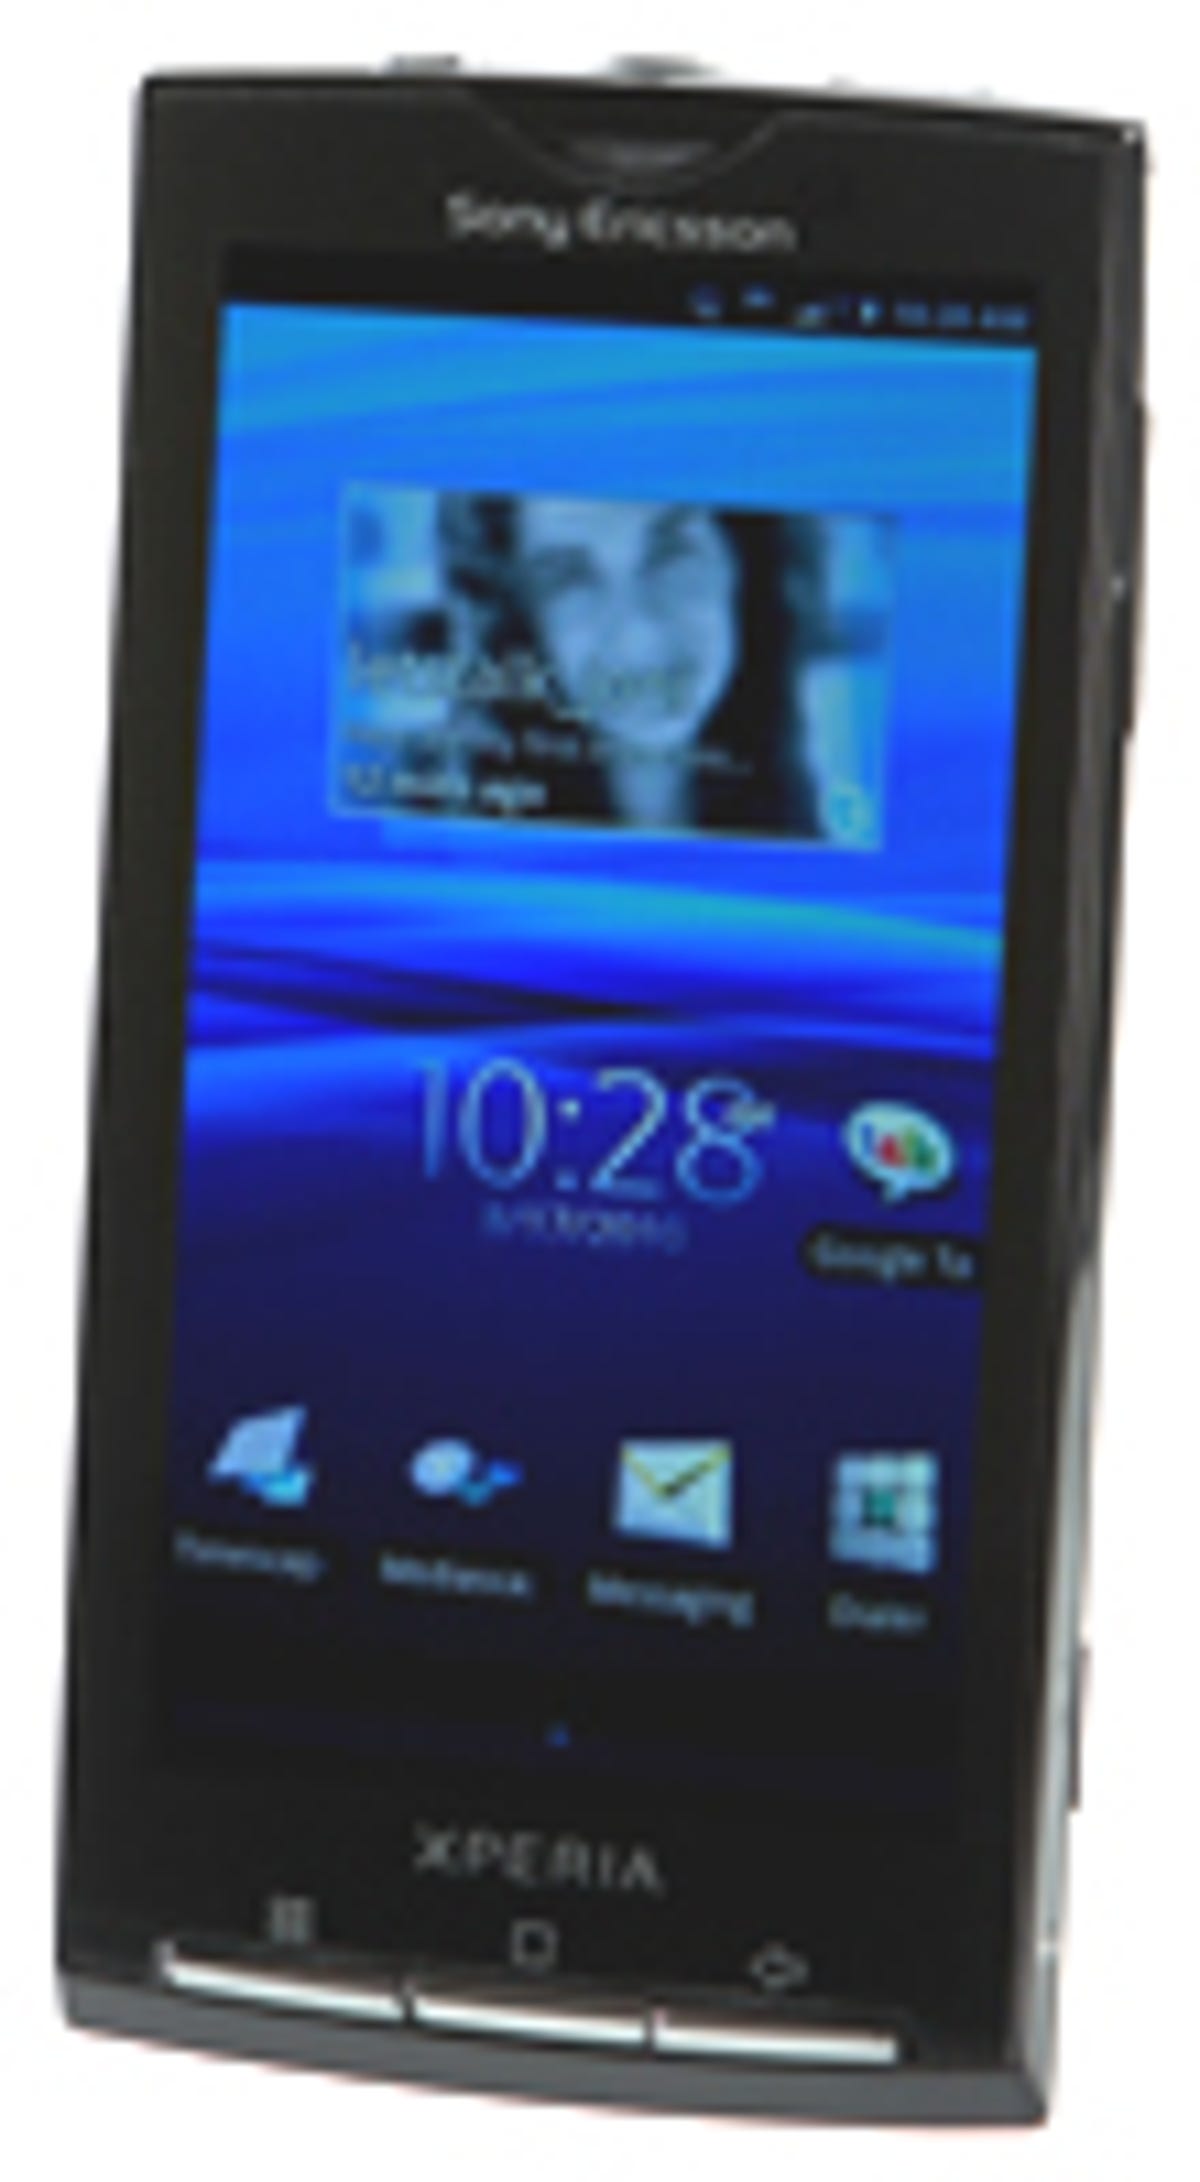 Android smartphones such as the Xperia X10 have helped buoy Sony Ericsson.